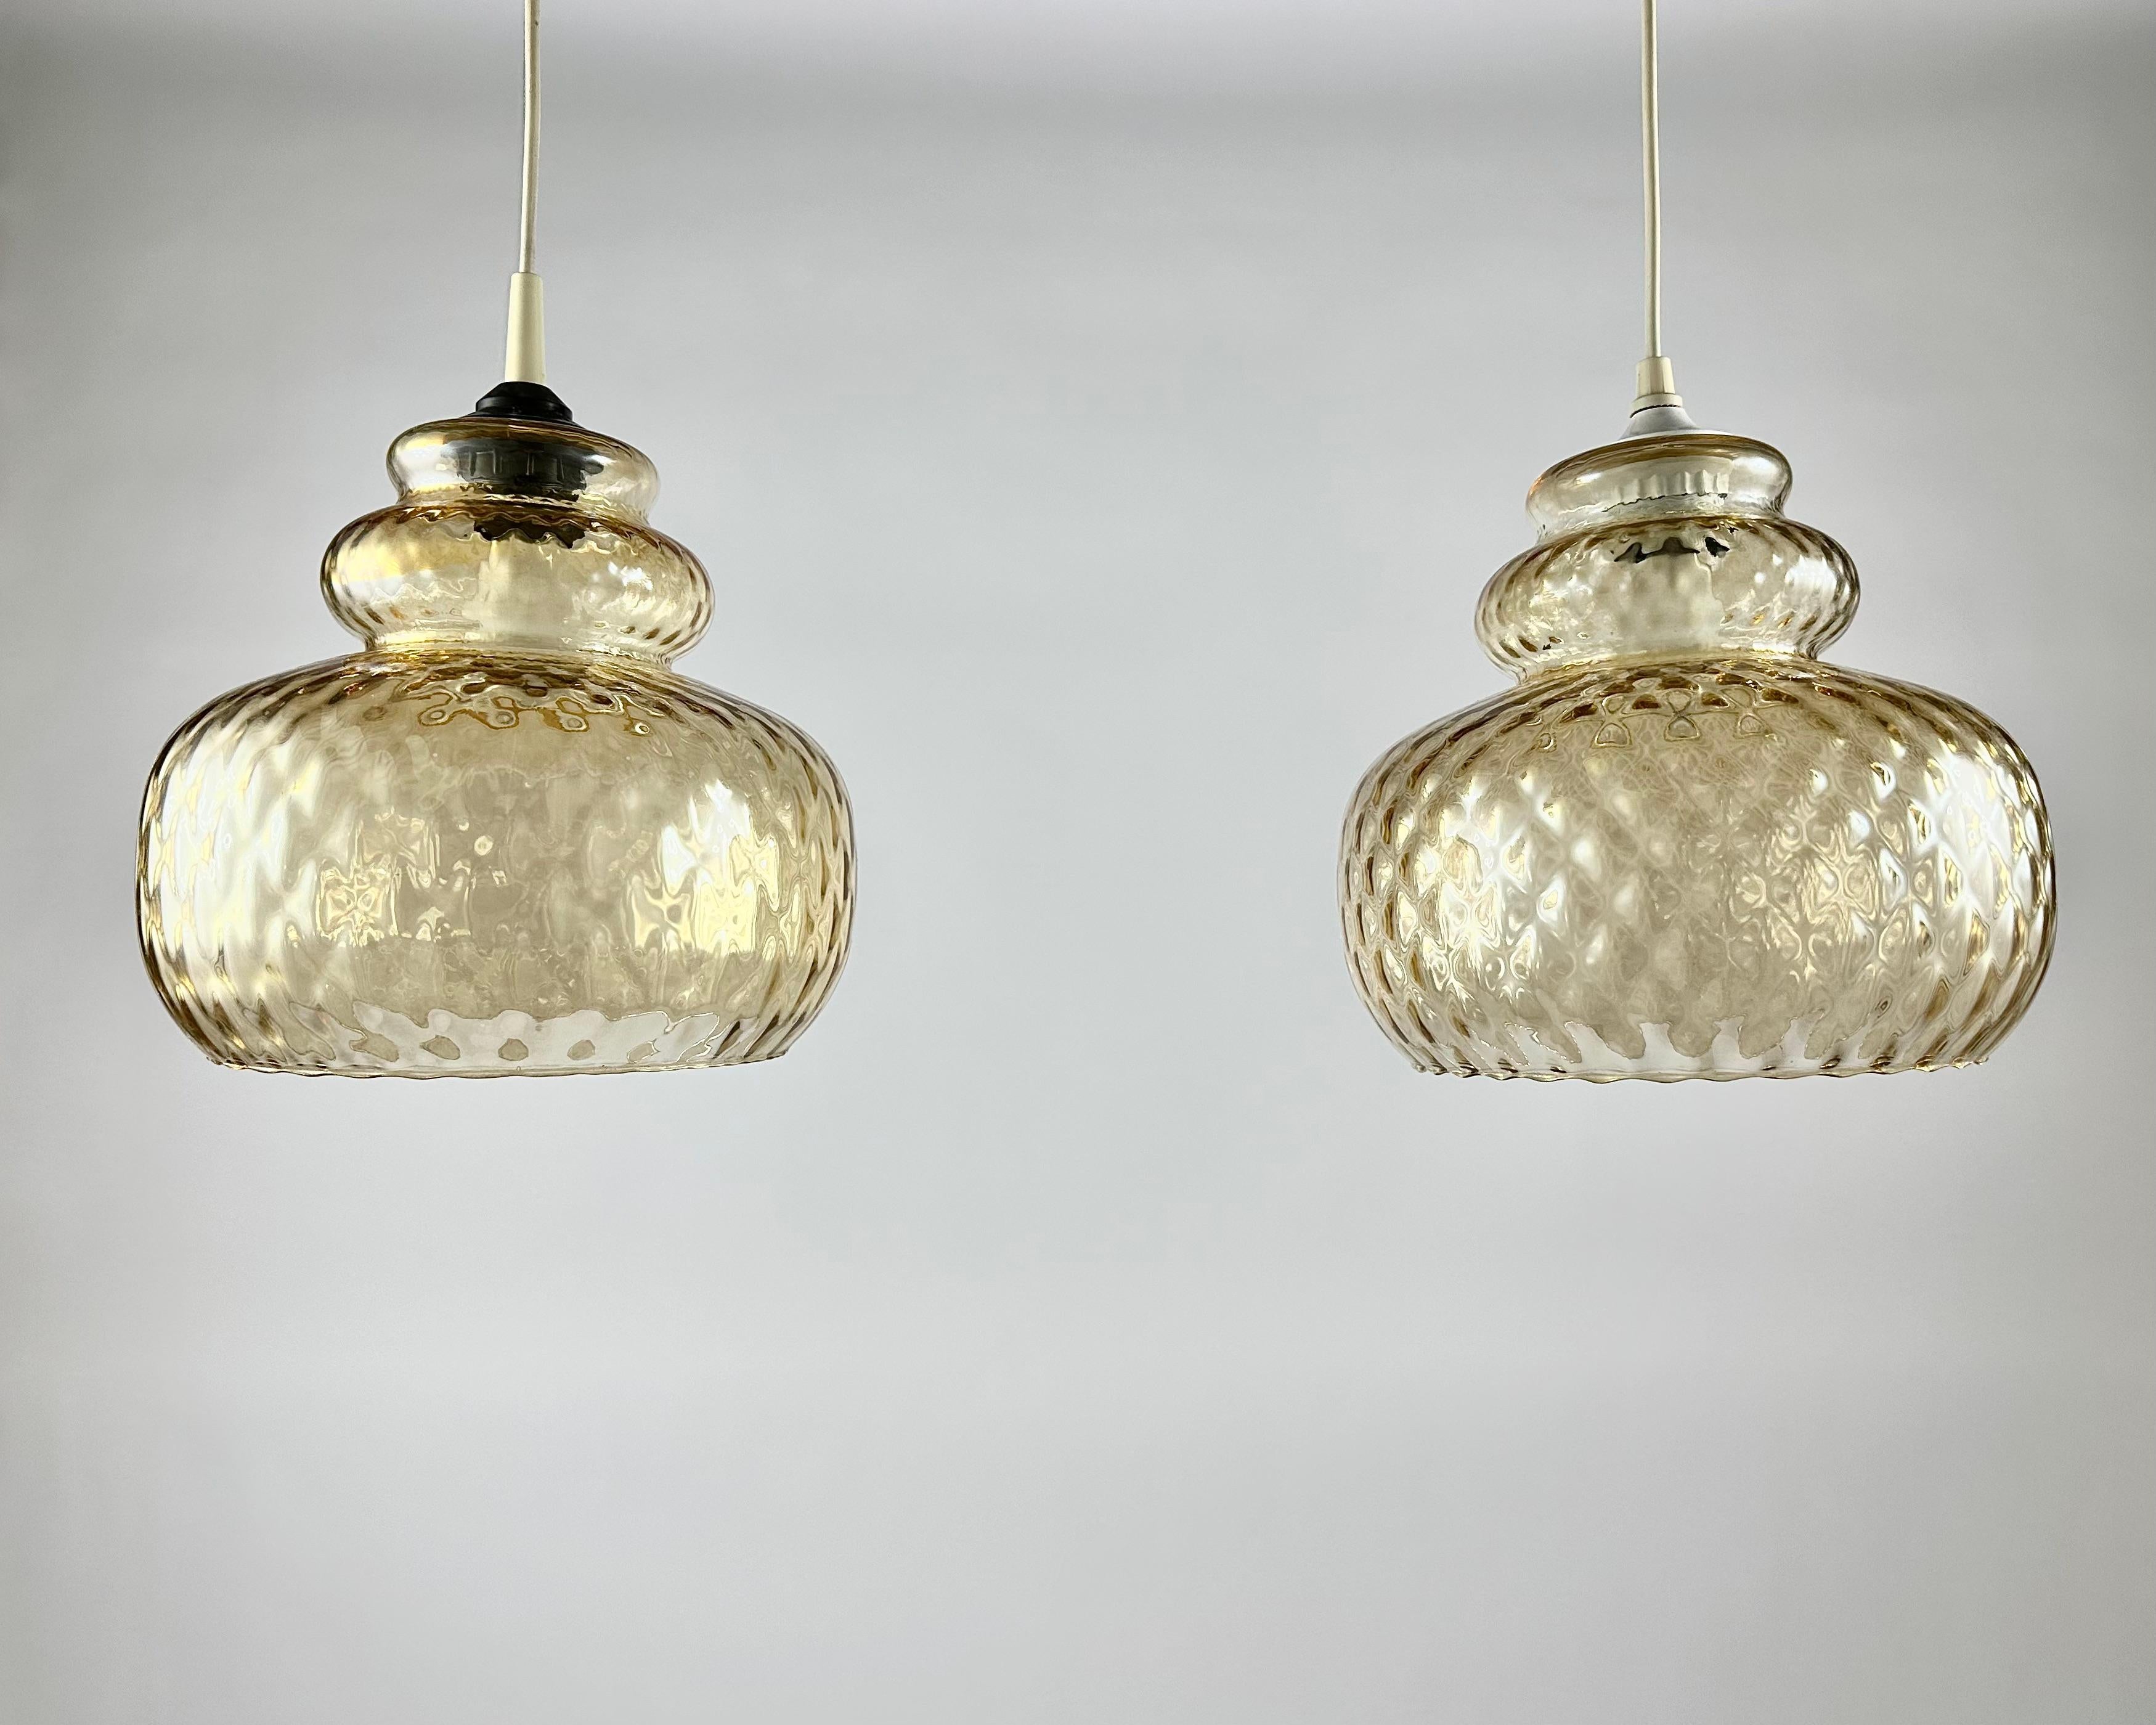 Very beautiful pendant lights with vintage amber glass ball.

Germany, 1970s.

Beautifully detailed, vintage lights in iridescent amber glass ball with facets.

Attractive amber glass vintage lamps that can be used as an accent in the interior and